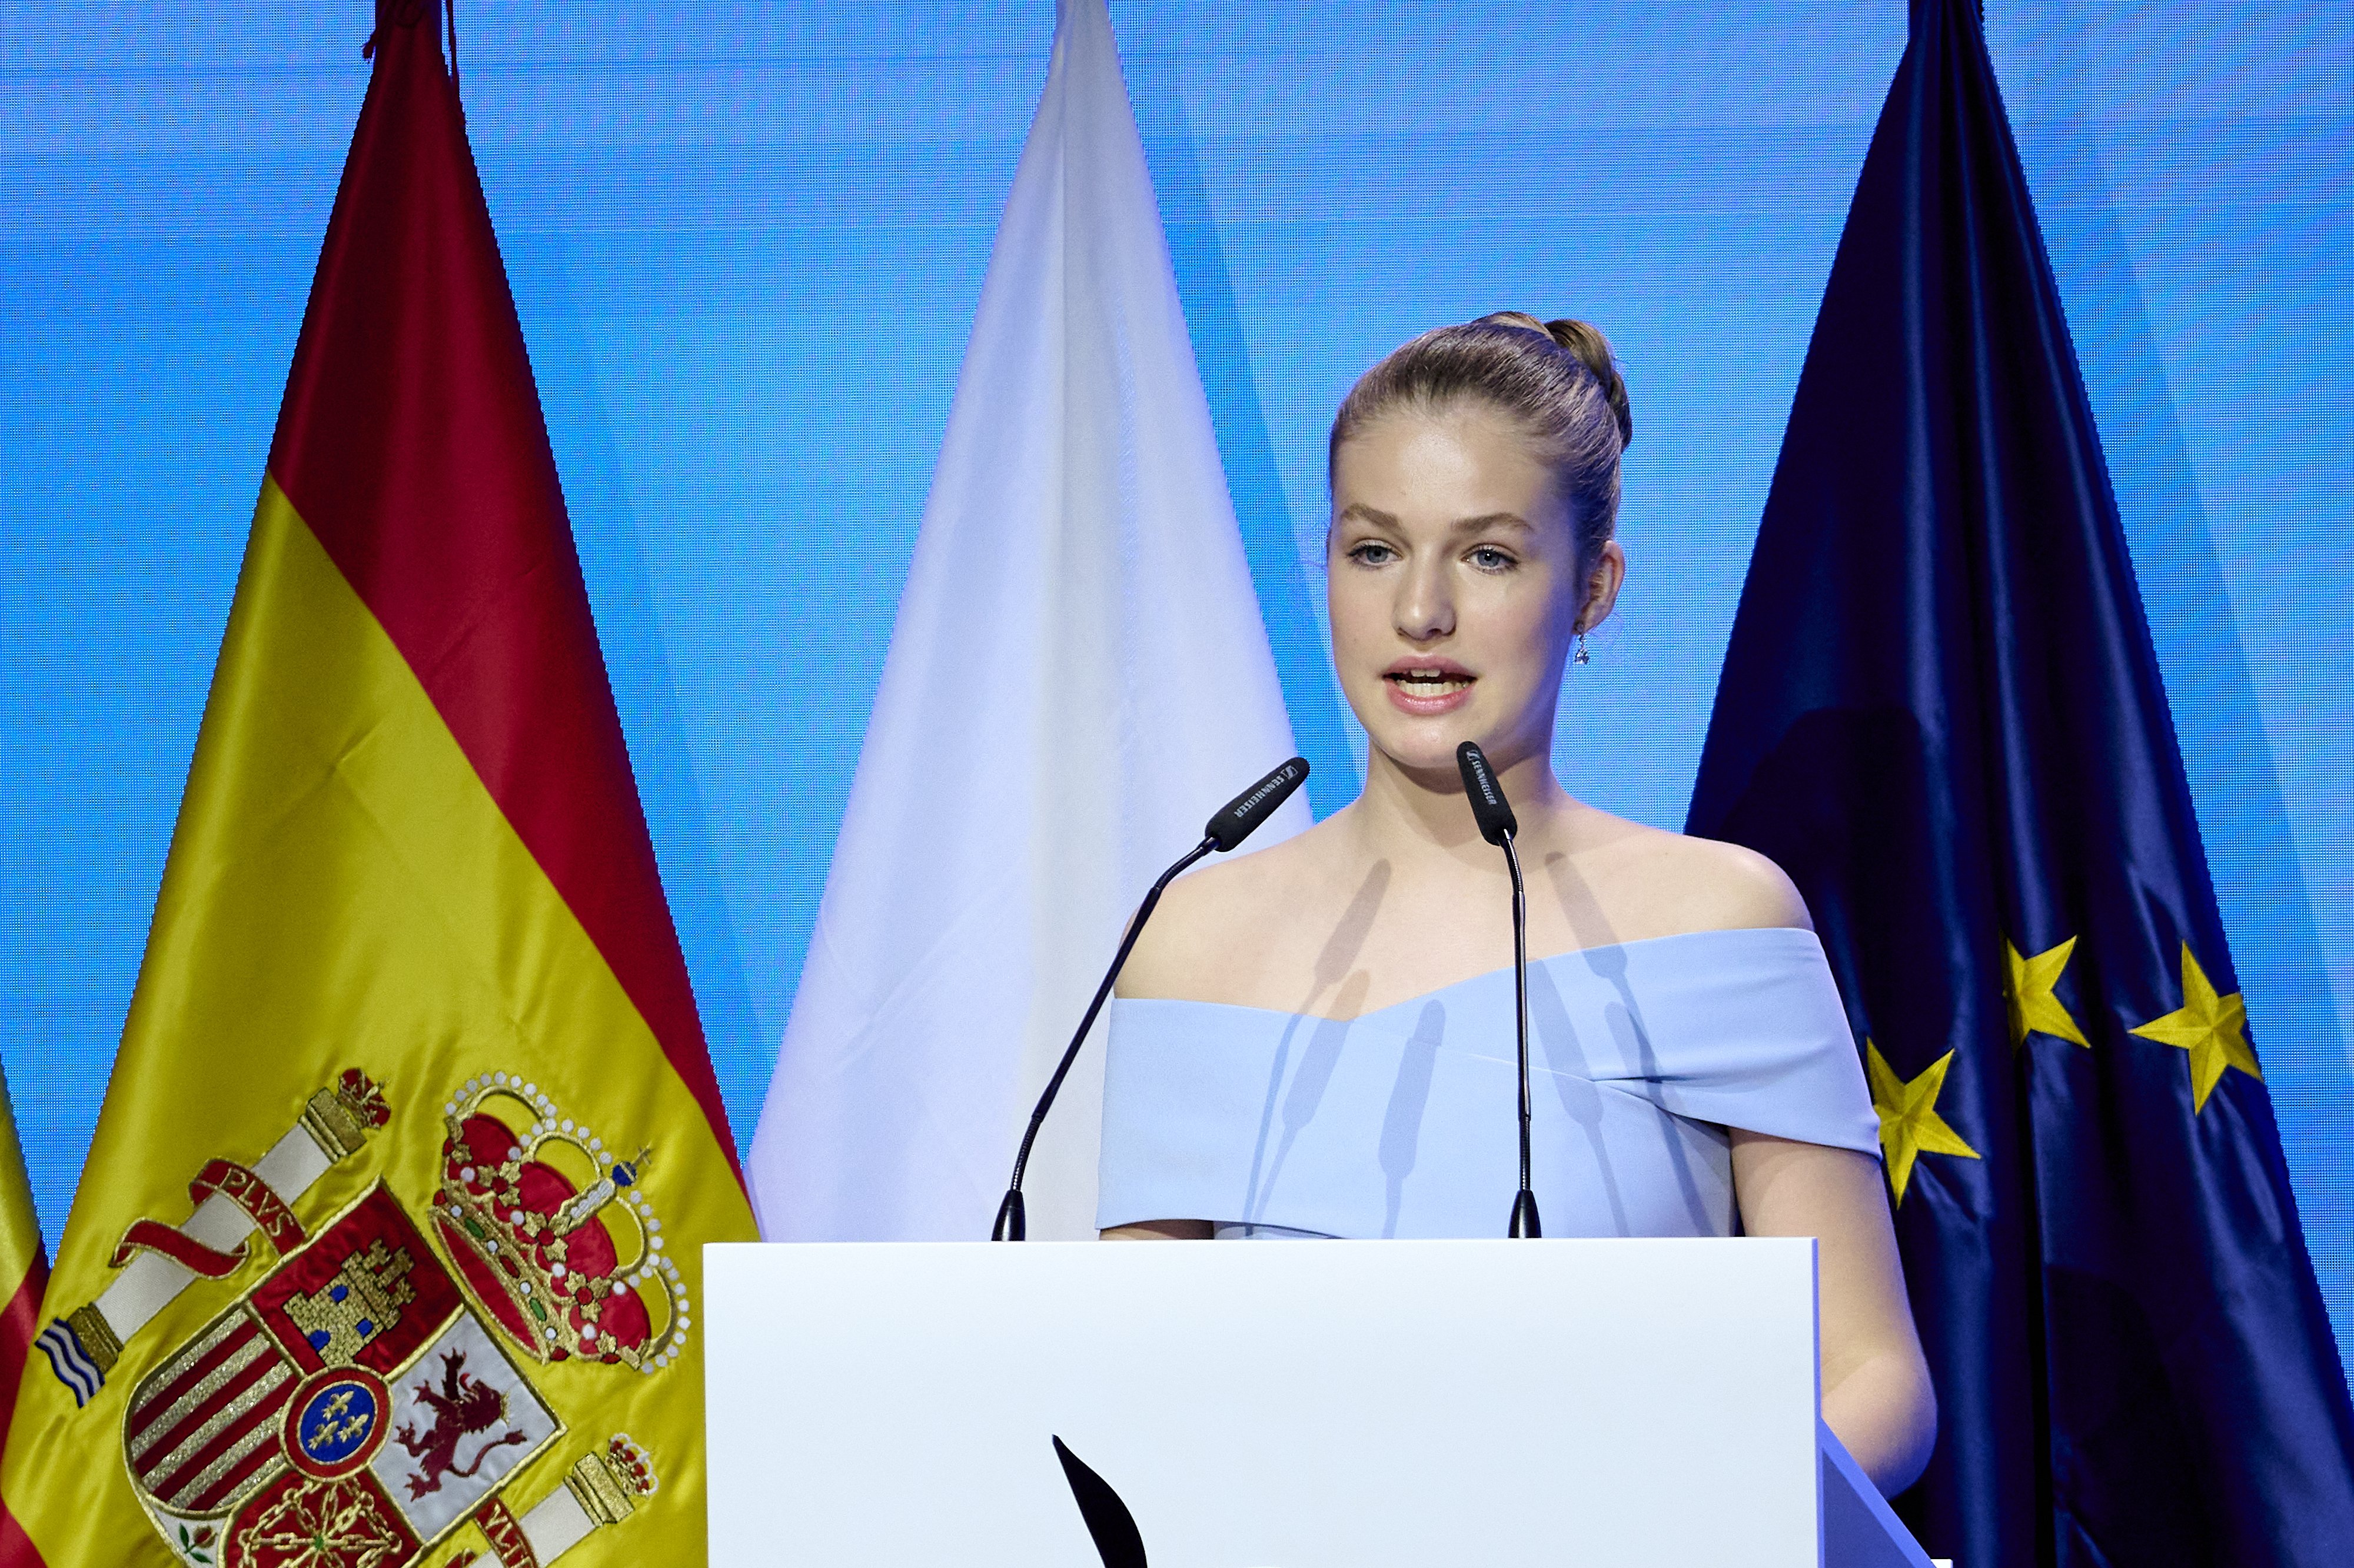 Crown Princess Leonor of Spain at the Princesa de Girona Foundation Awards at the Agbar Foundation on July 4, 2022, in Barcelona, Spain | Source: Getty Images